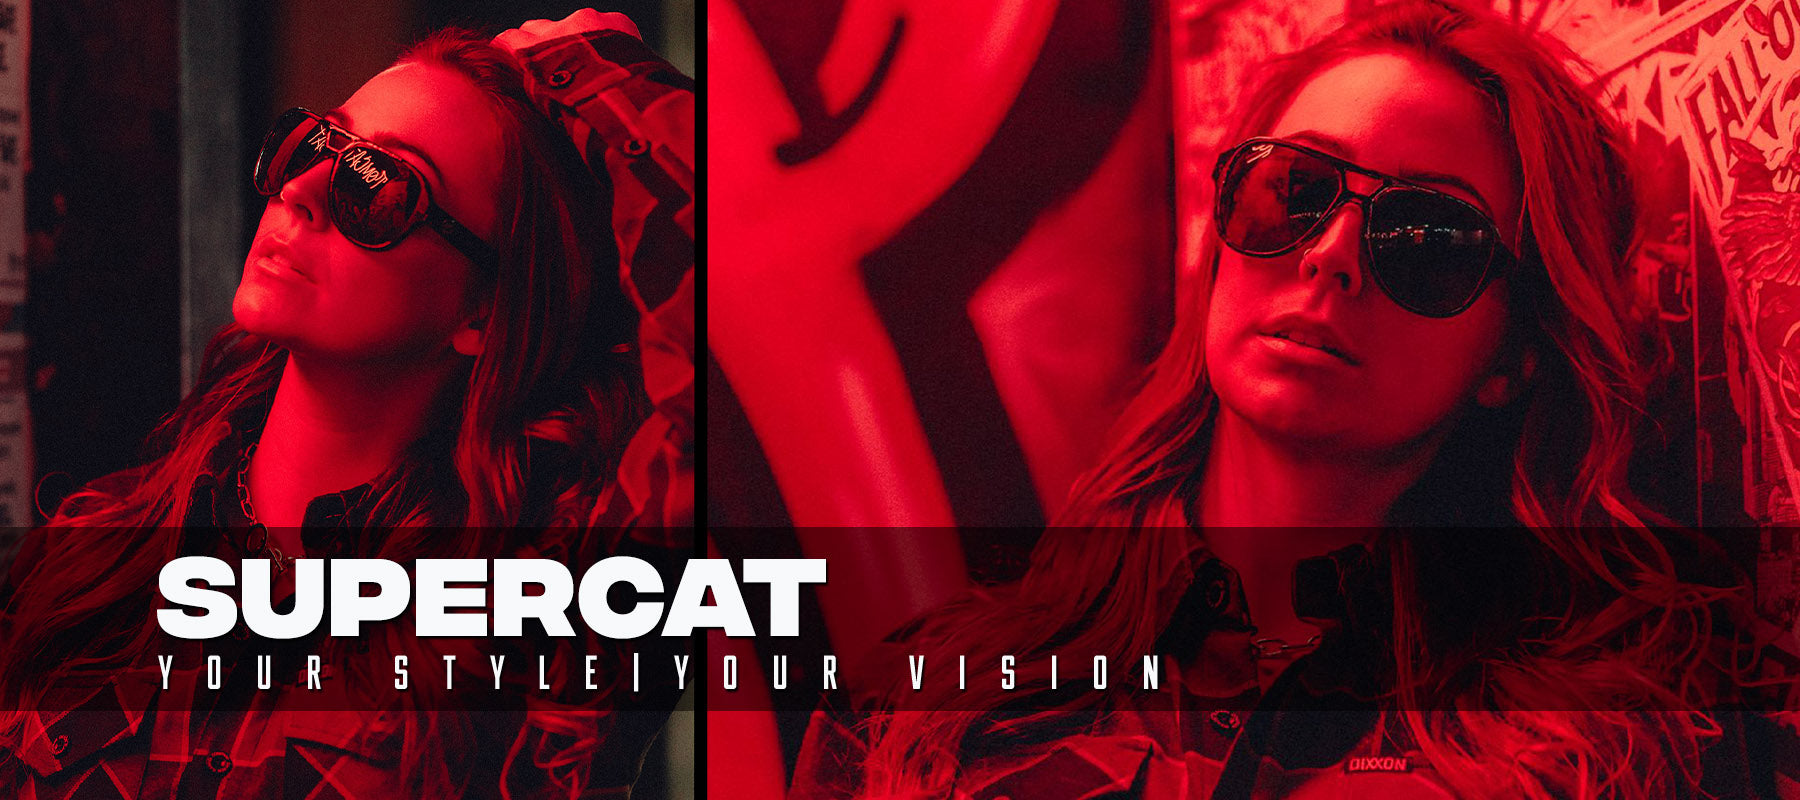 Shop Official Heat Wave Visual Australia. Free Same Day Shipping. Heat Wave Sunglasses. Your Style Your Vision. Heat Wave Protective Eyewear. Heat Wave Safety Glasses. Lazer Face. Polarized Sunglasses. Born In California Now Available In Australia